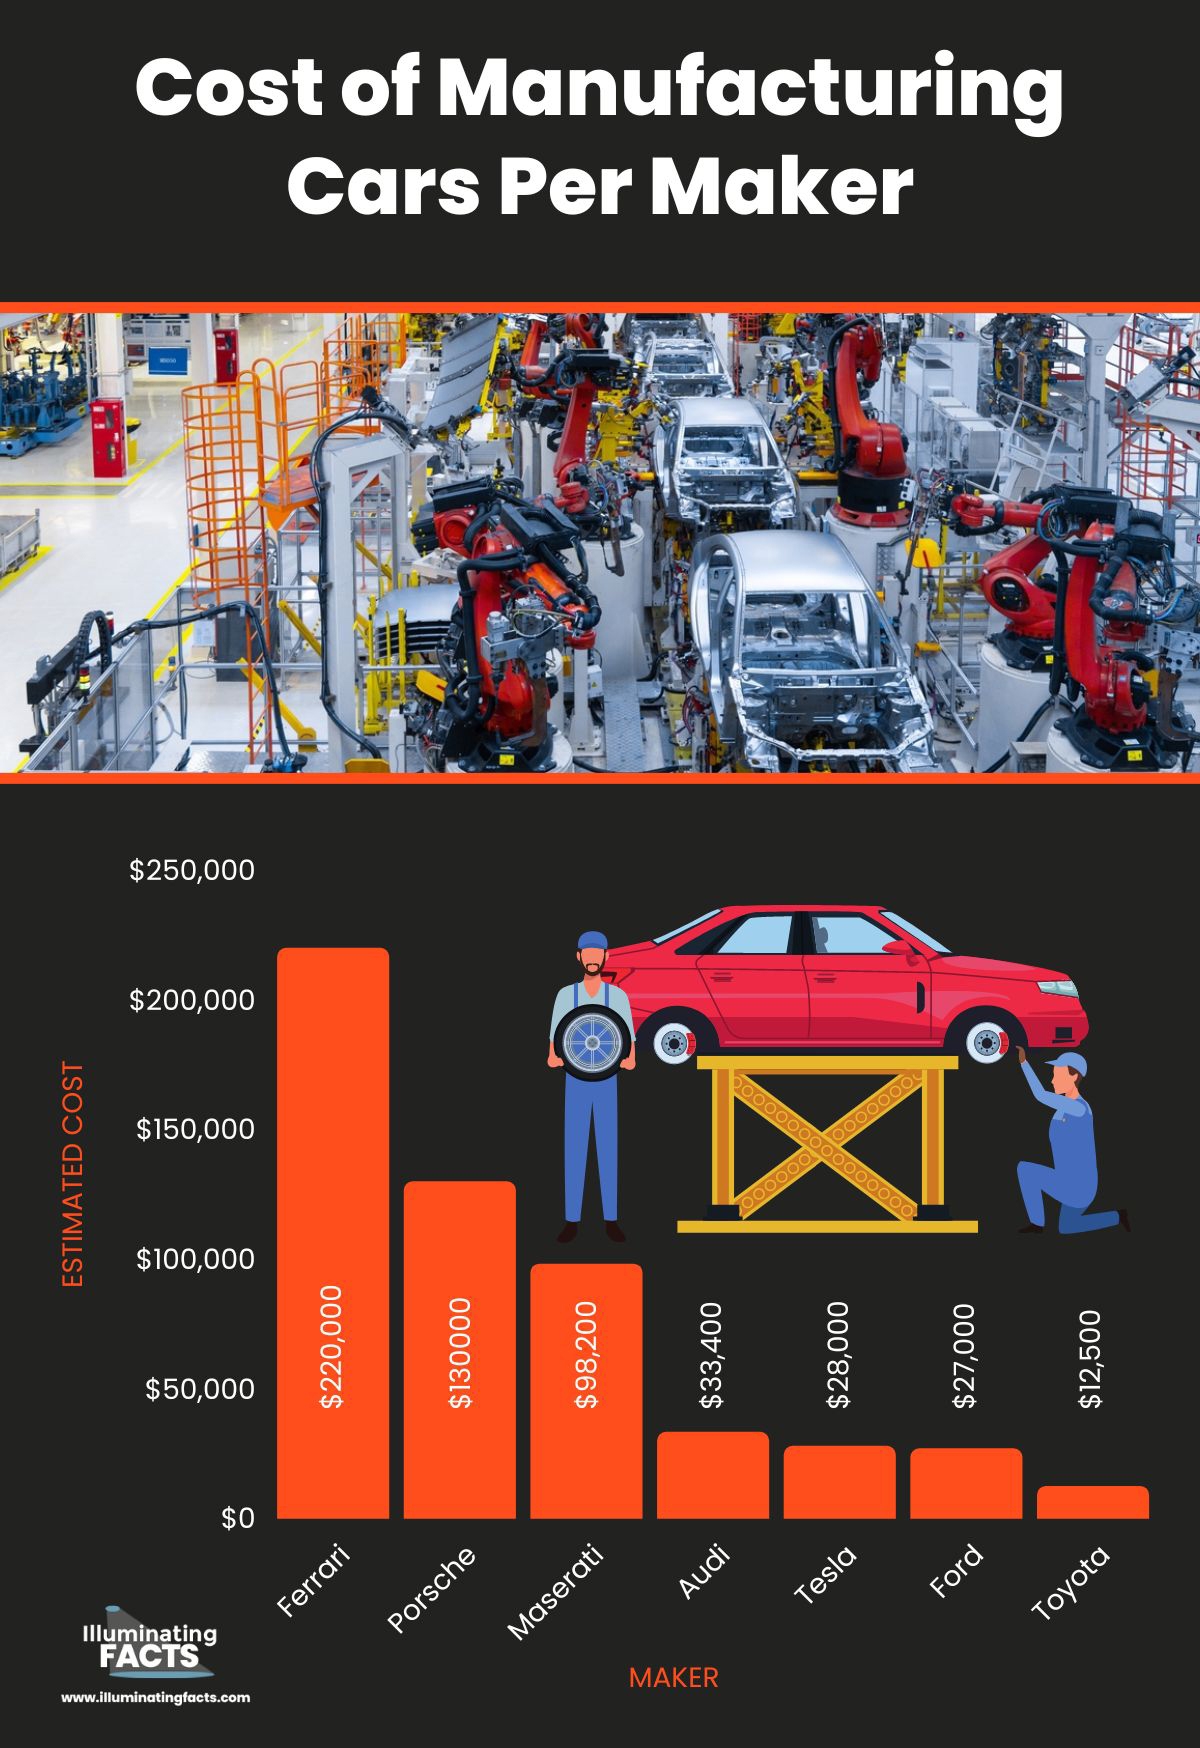 Cost of Manufacturing Cars Per Maker